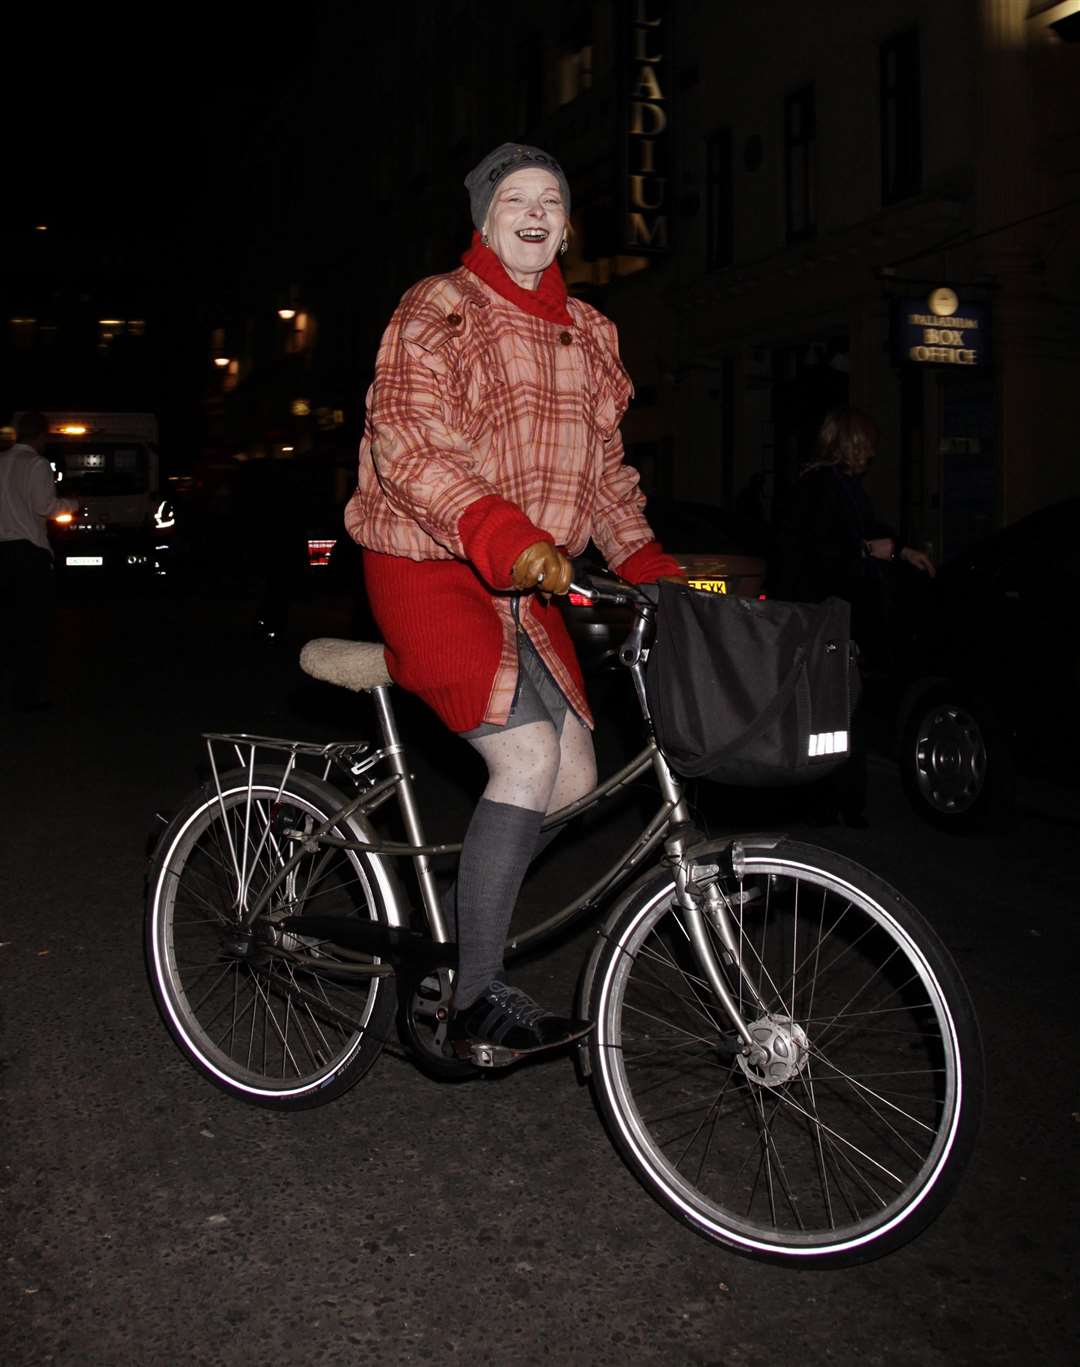 Dame Vivienne arrives for a book launch party, at Aqua in central London, on a bike (Yui Mok/PA)